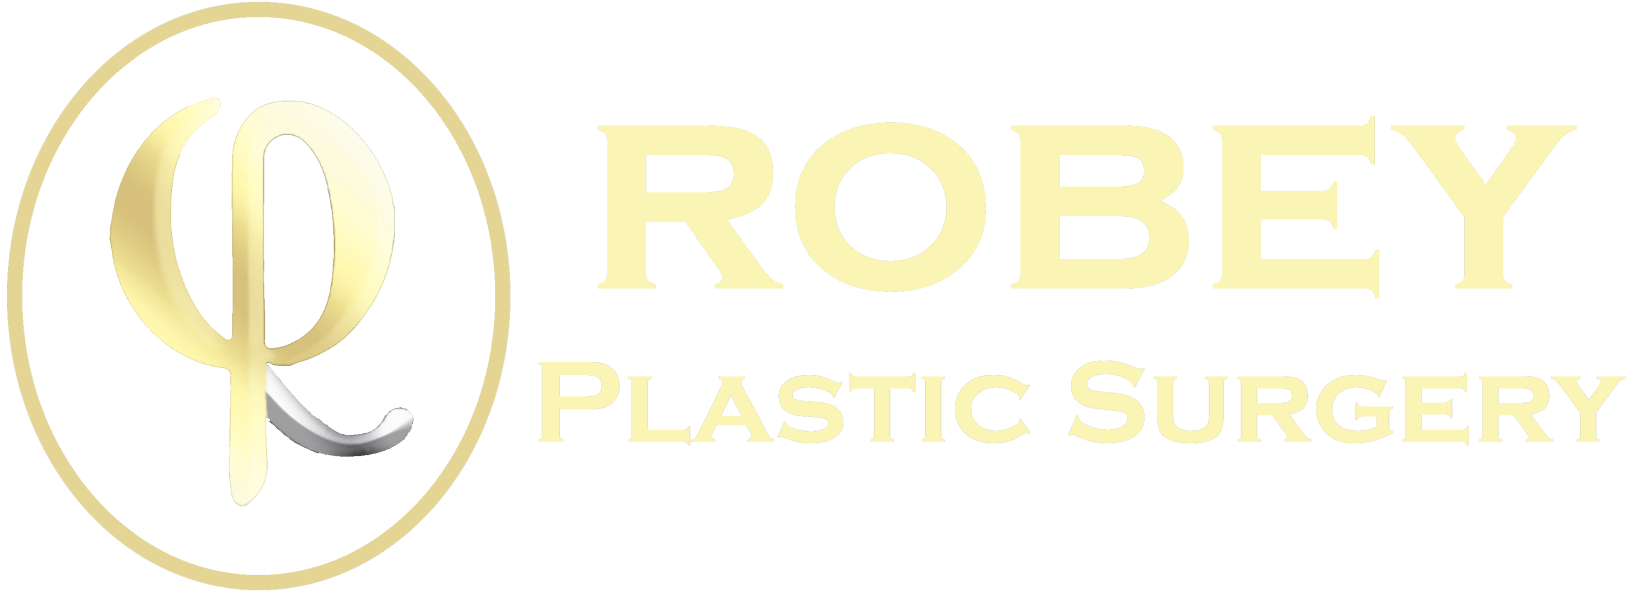 robey plastic surgery logo tablet